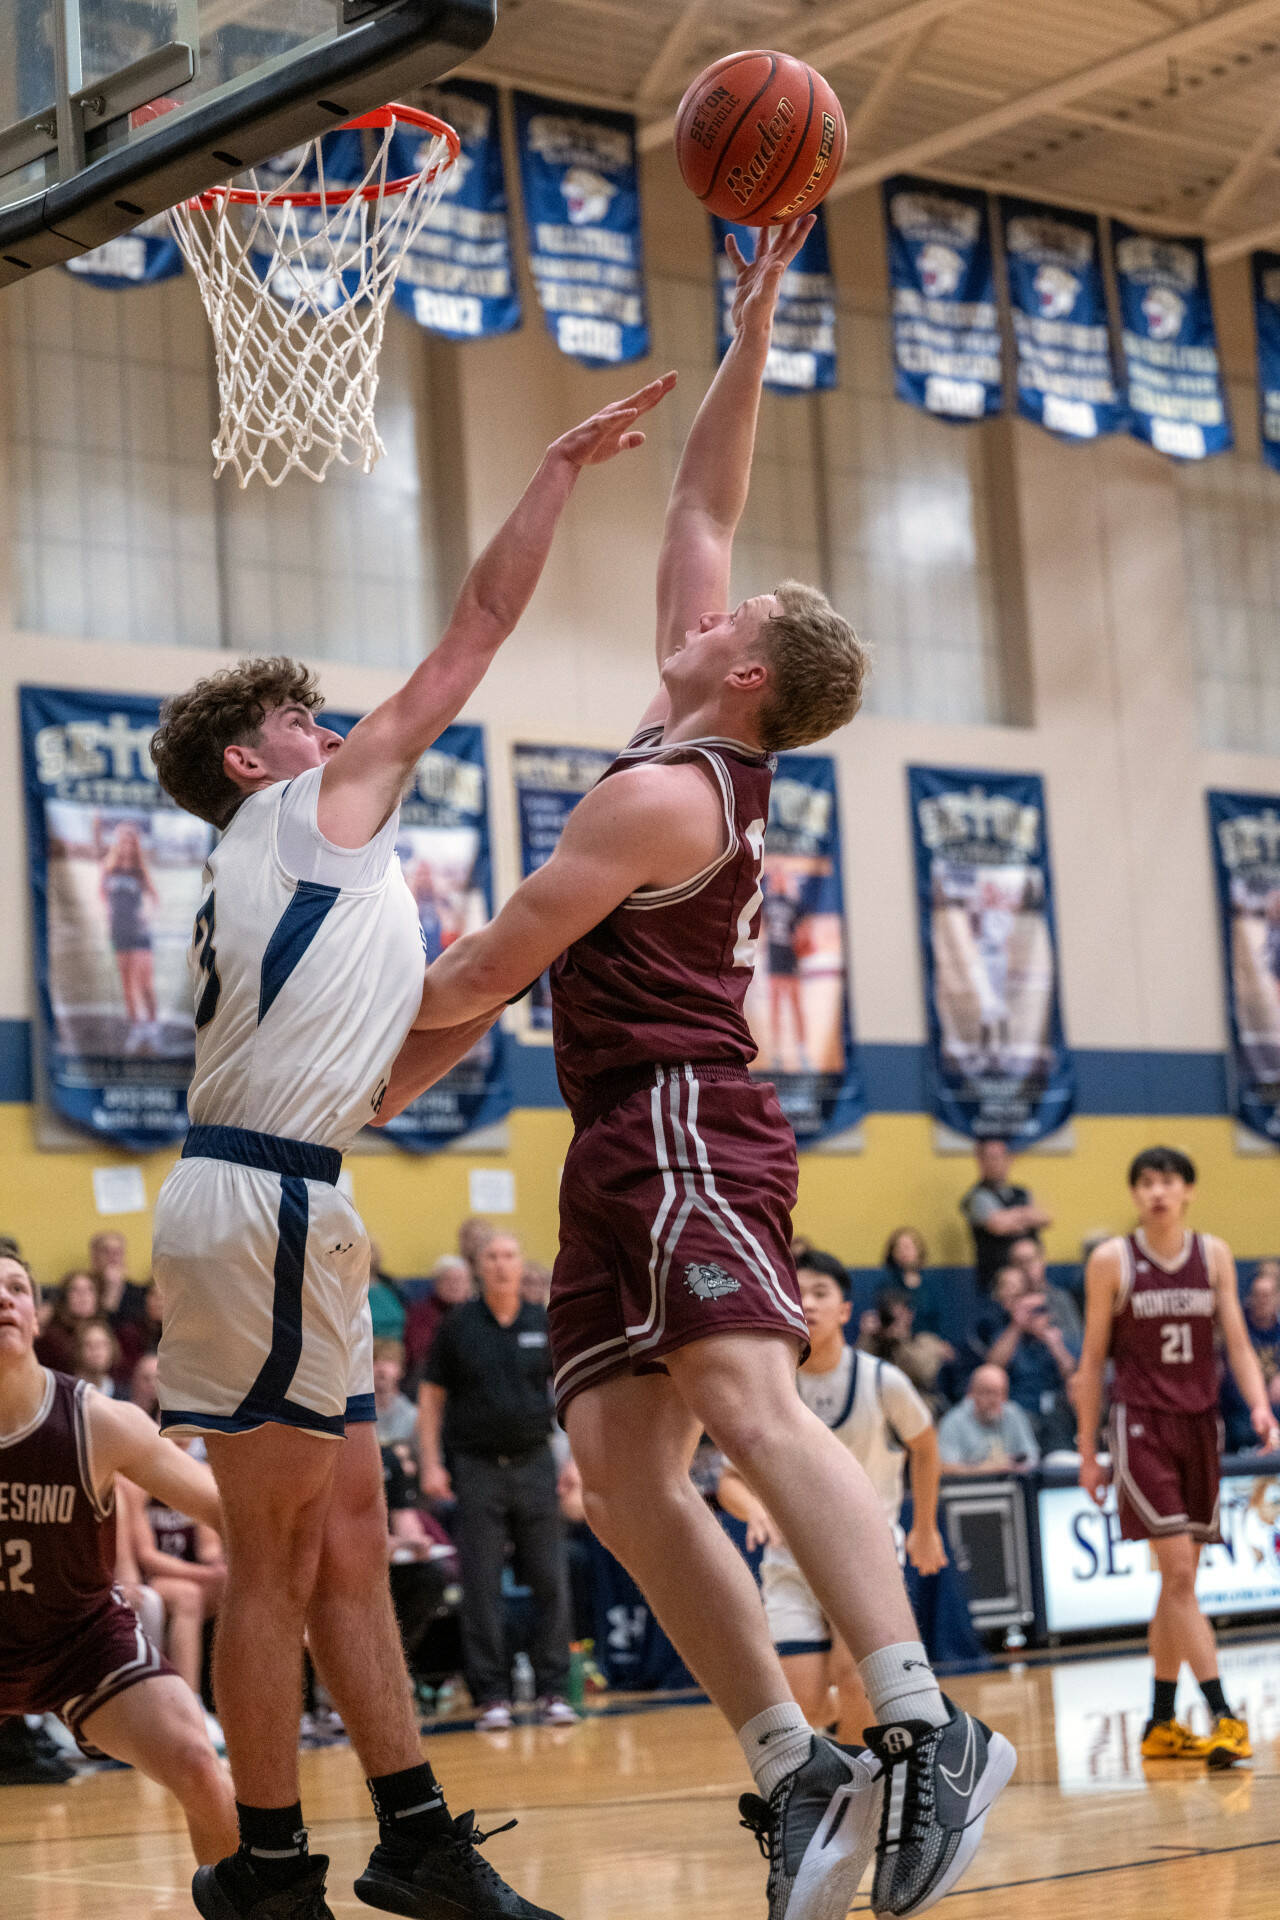 PHOTO BY FOREST WORGUM Montesano senior Tyce Peterson, right, drives to the hoop during the Bulldogs’ 58-46 loss to Seton Catholic in a 1A District 4 Tournament semifinal game on Friday in Vancouver.